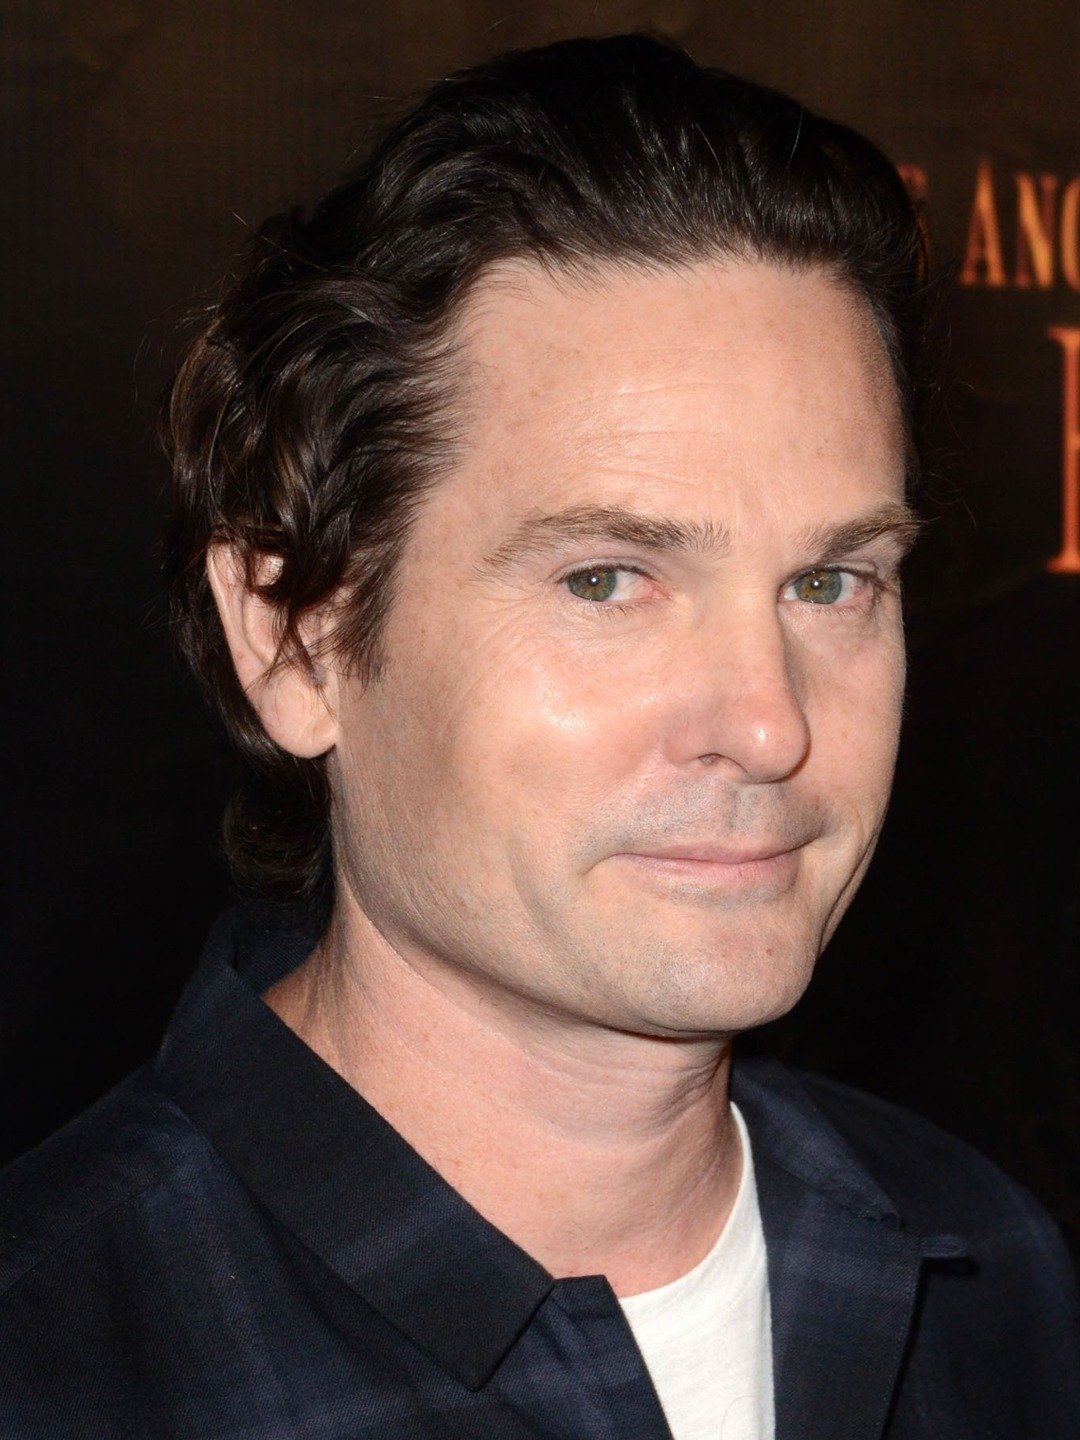 How tall is Henry Thomas?